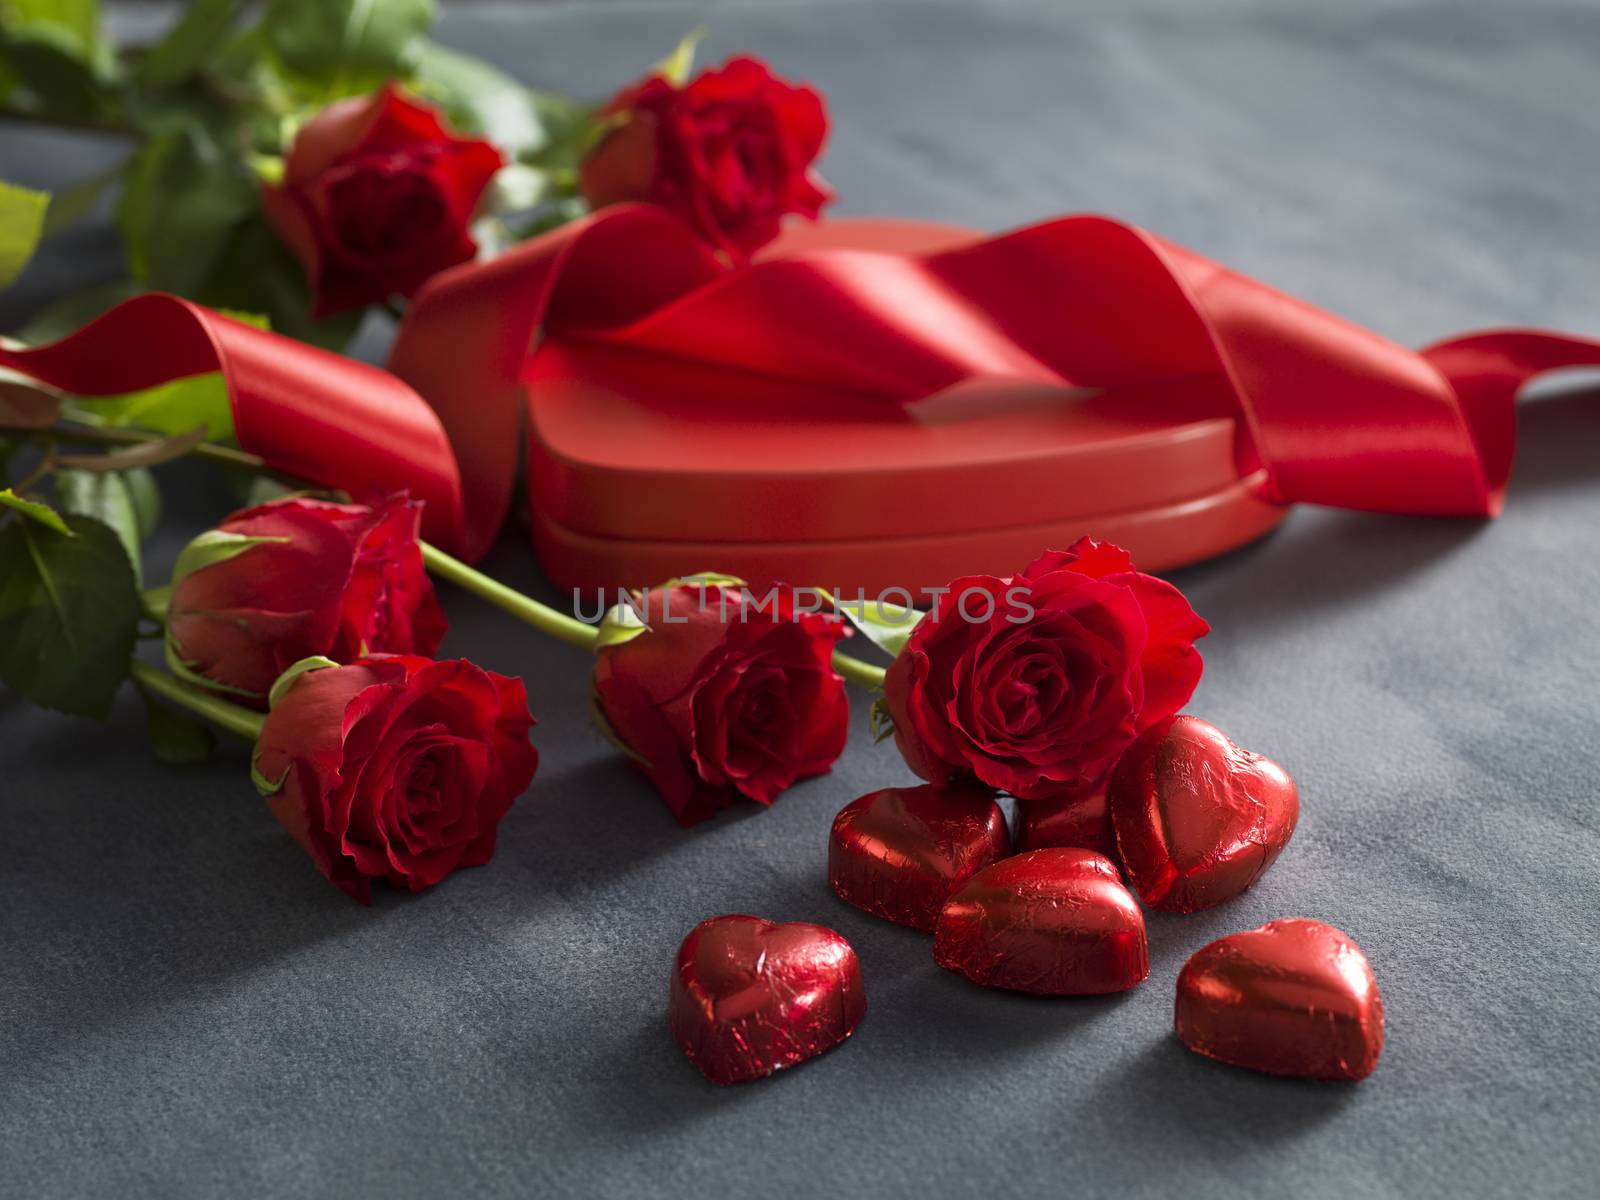 Valentines Day red rose and box with red hearts by janssenkruseproductions